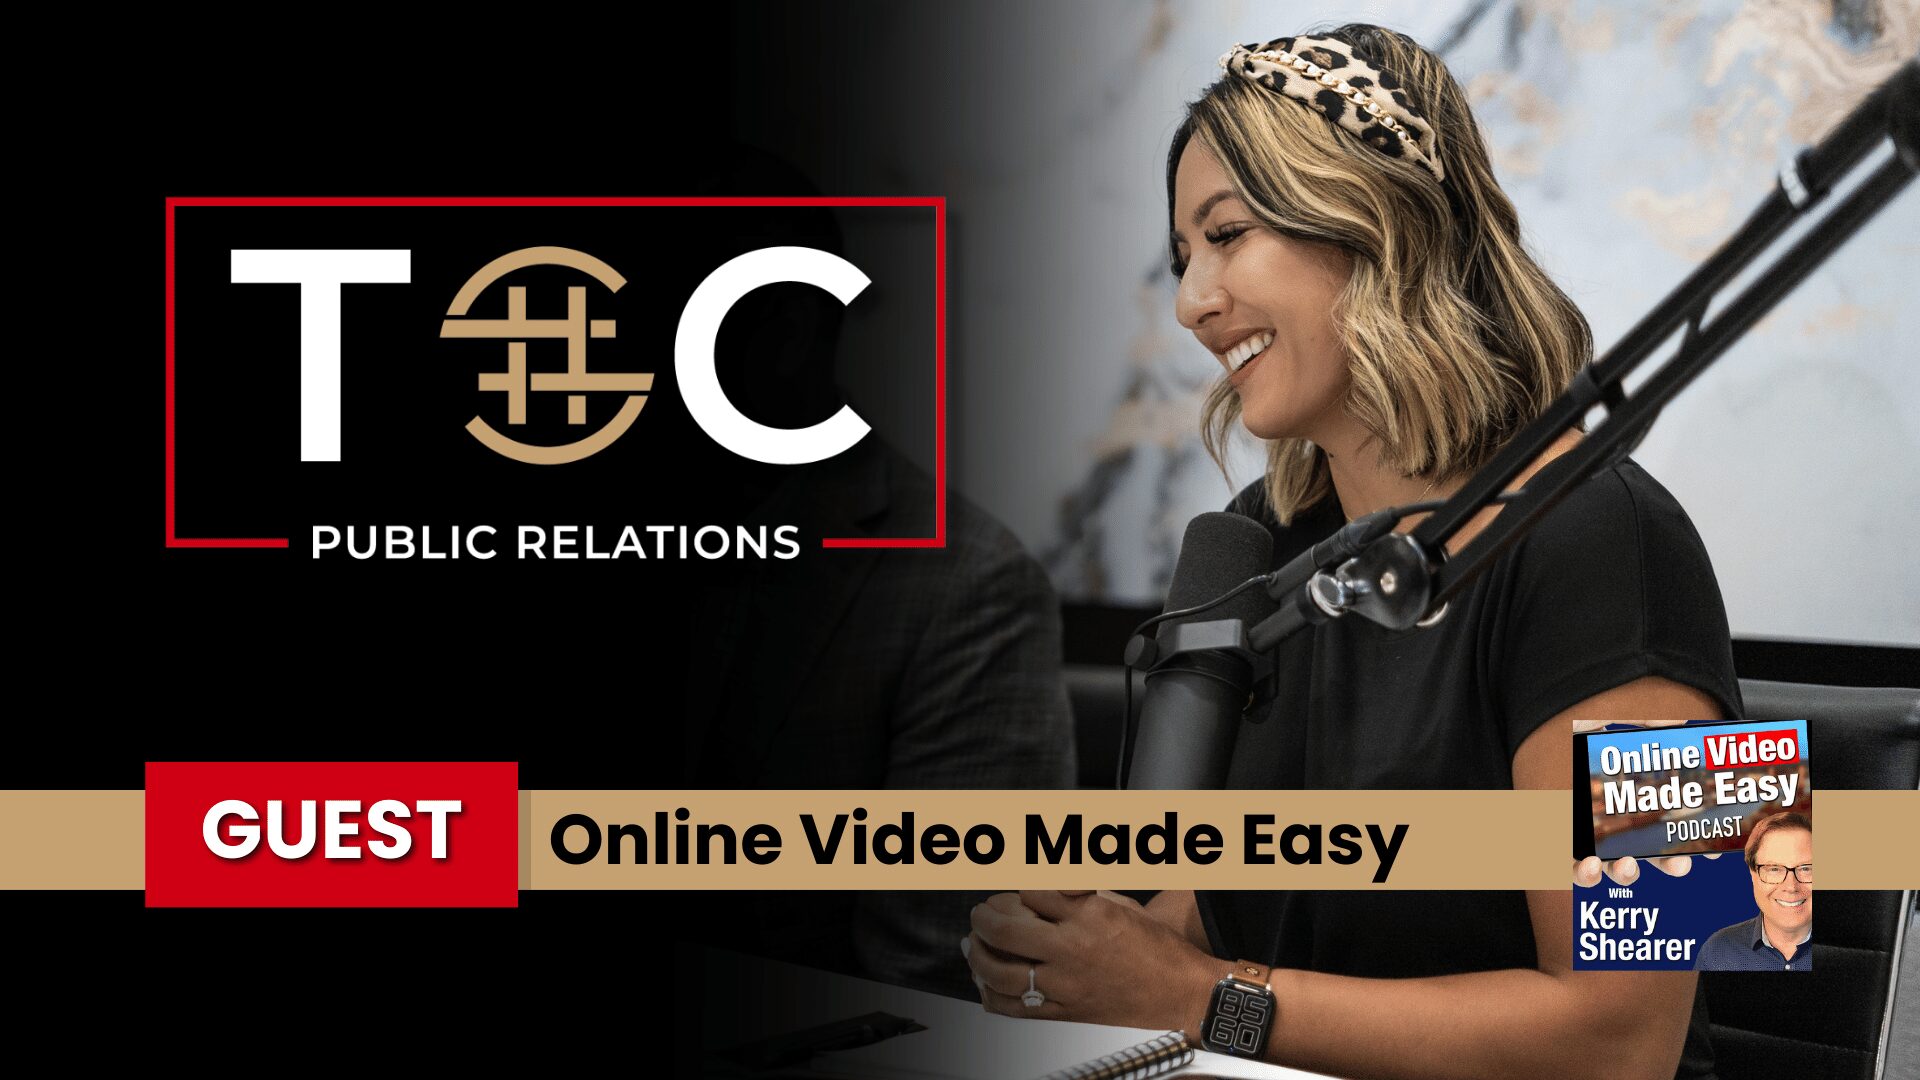 Online Video Made Easy Podcast cover image